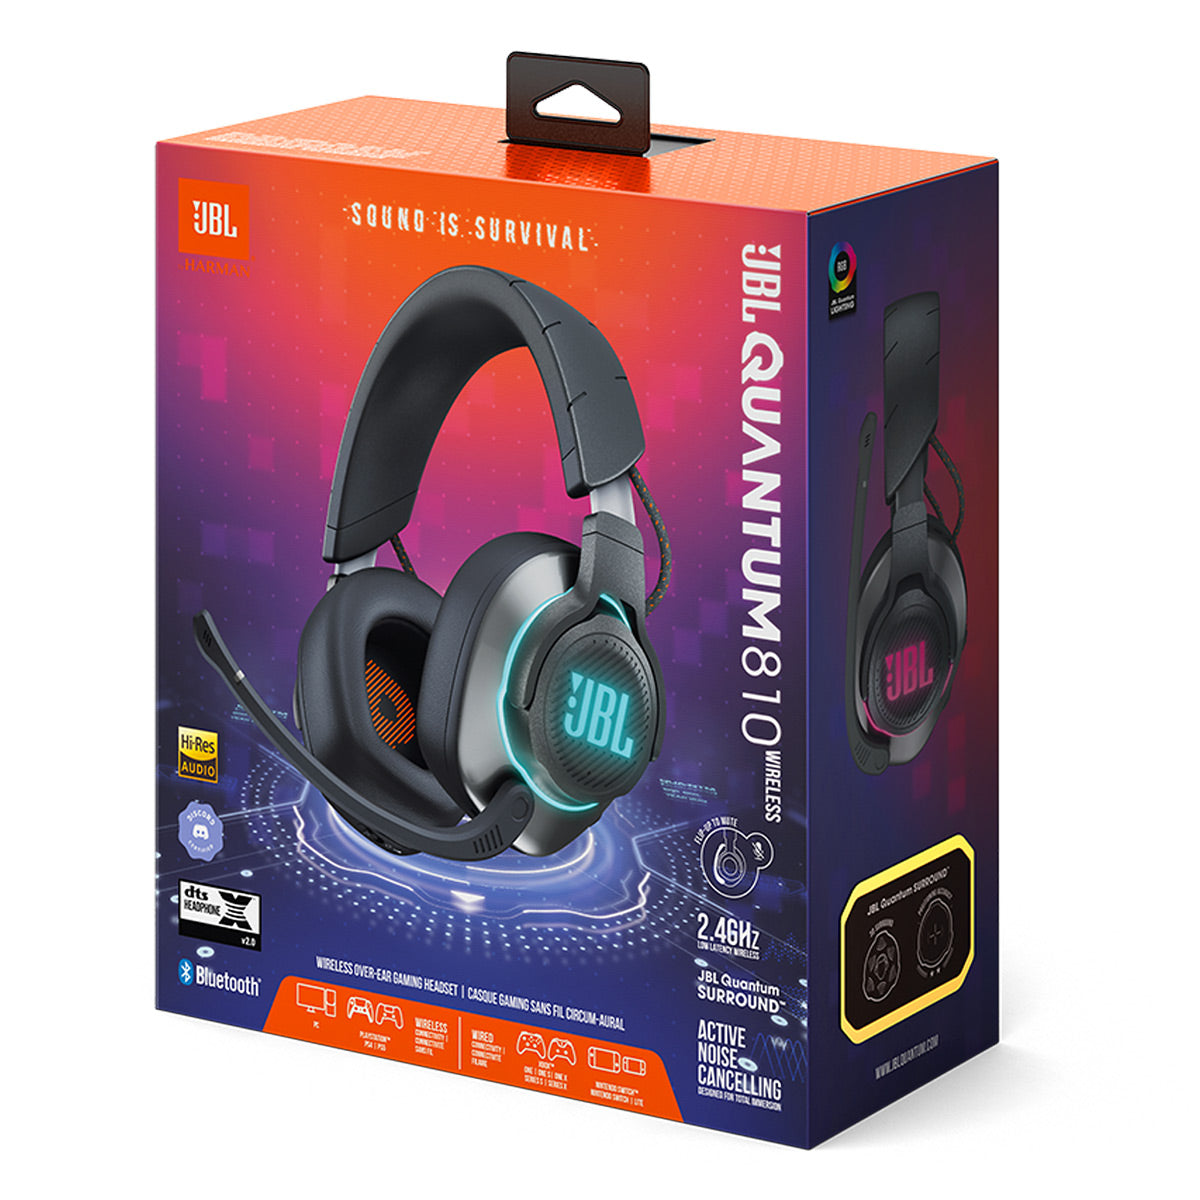 JBL Quantum 810 Wireless Over-Ear Gaming Headset with Active Noise Cancelling & Bluetooth